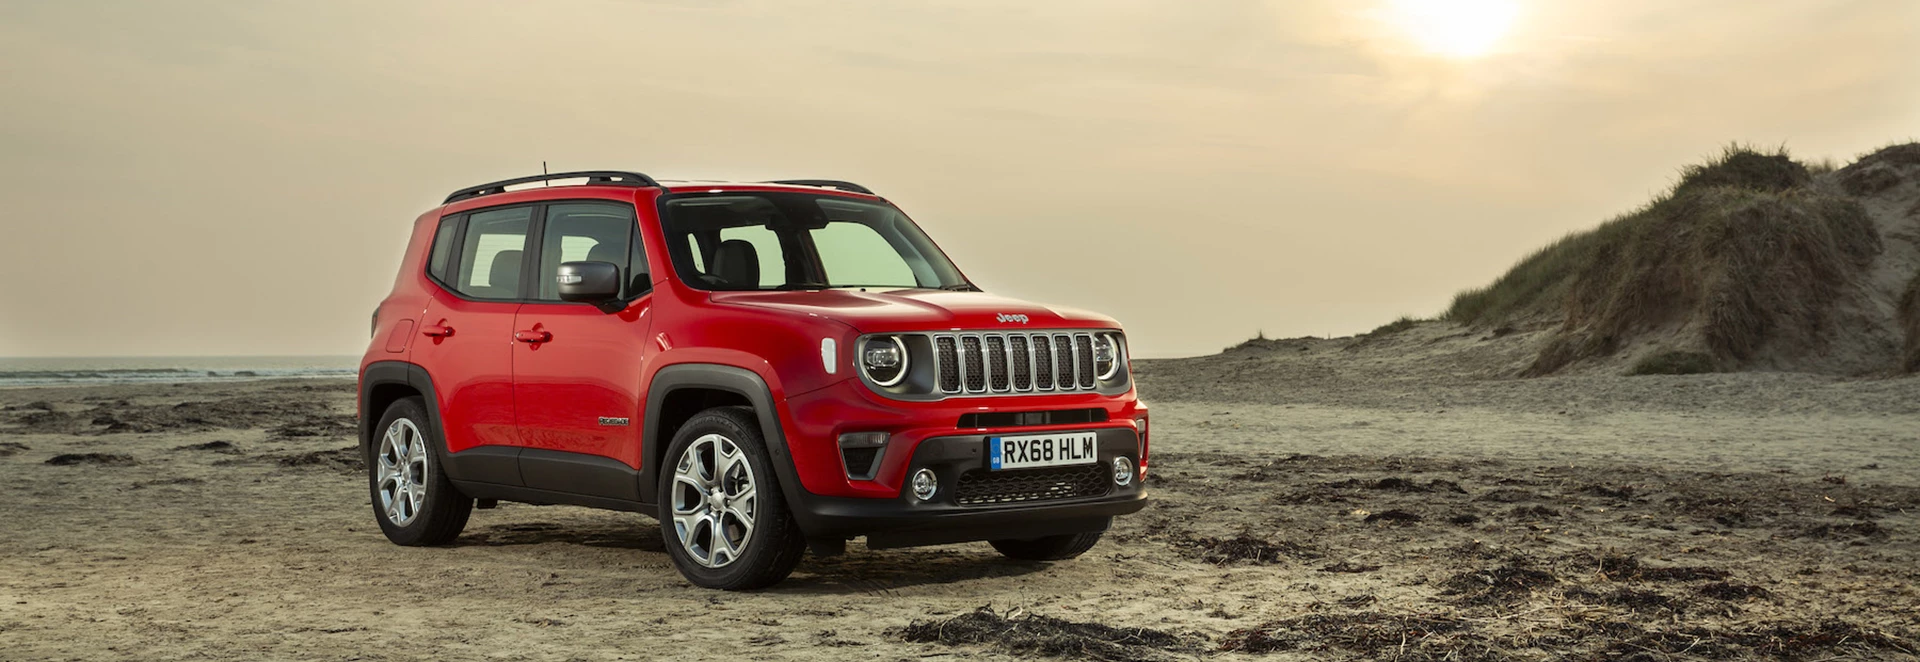 Buyer’s guide to the Jeep Renegade